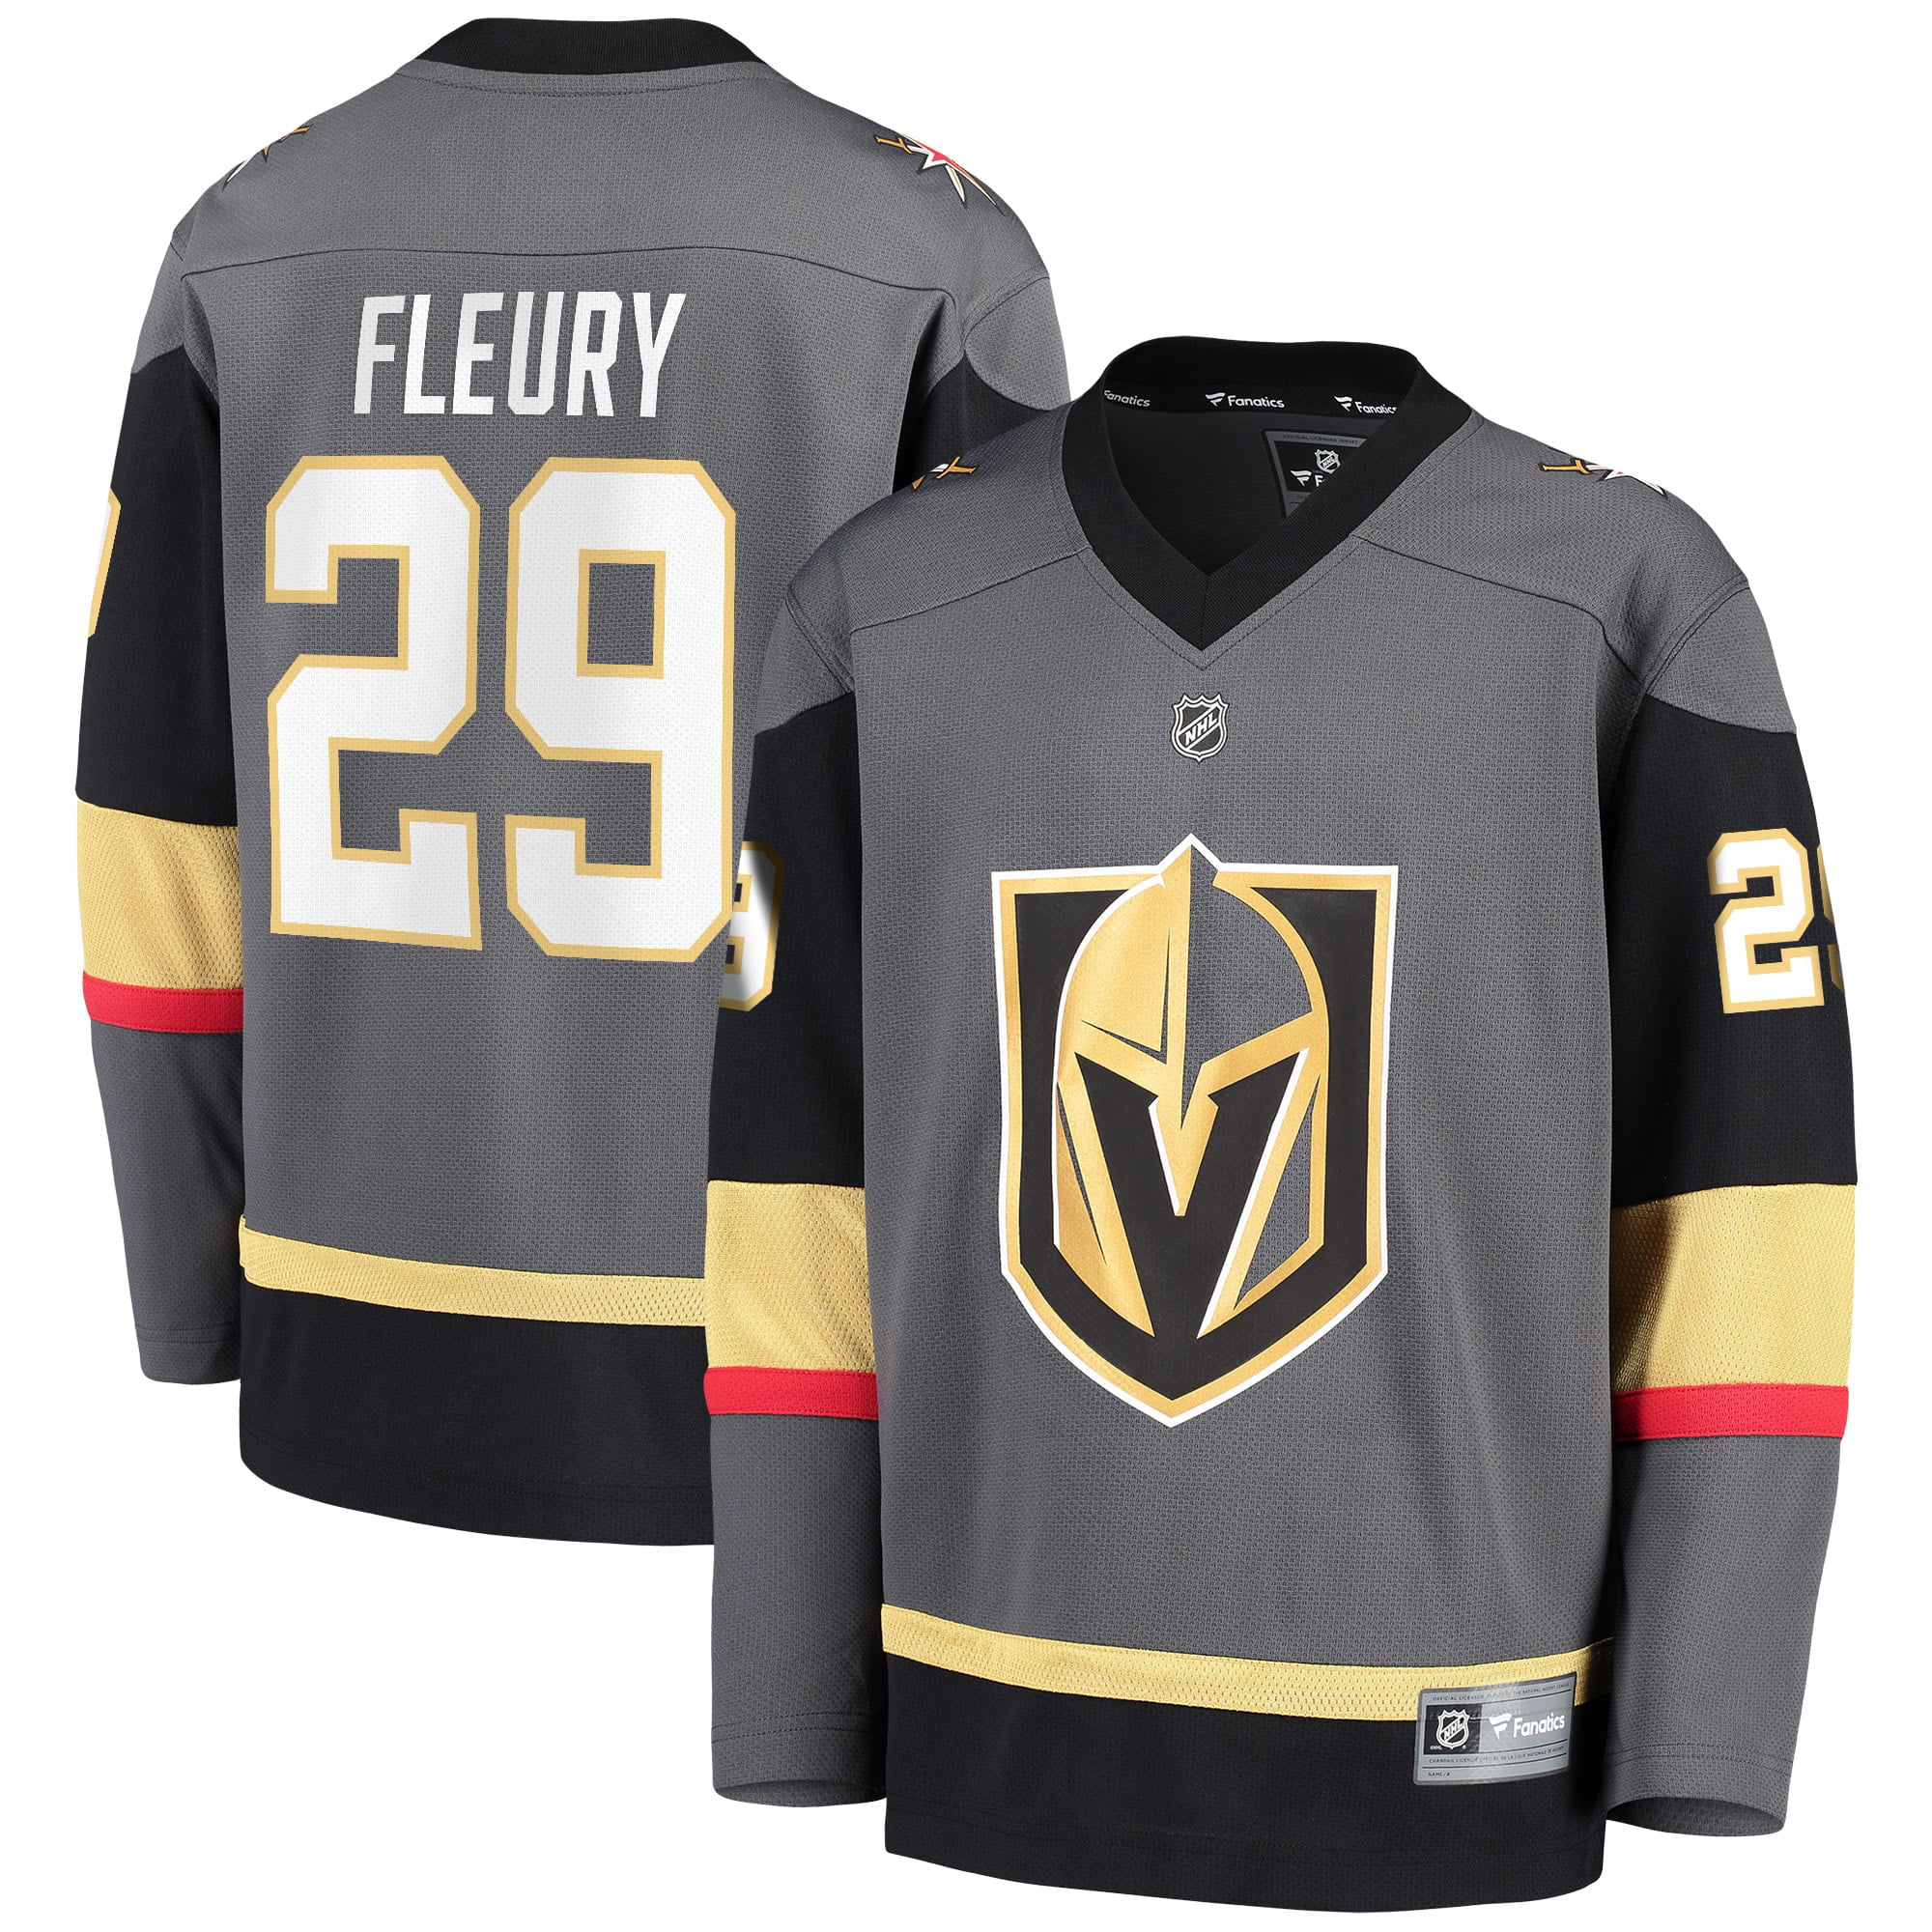 youth fleury jersey